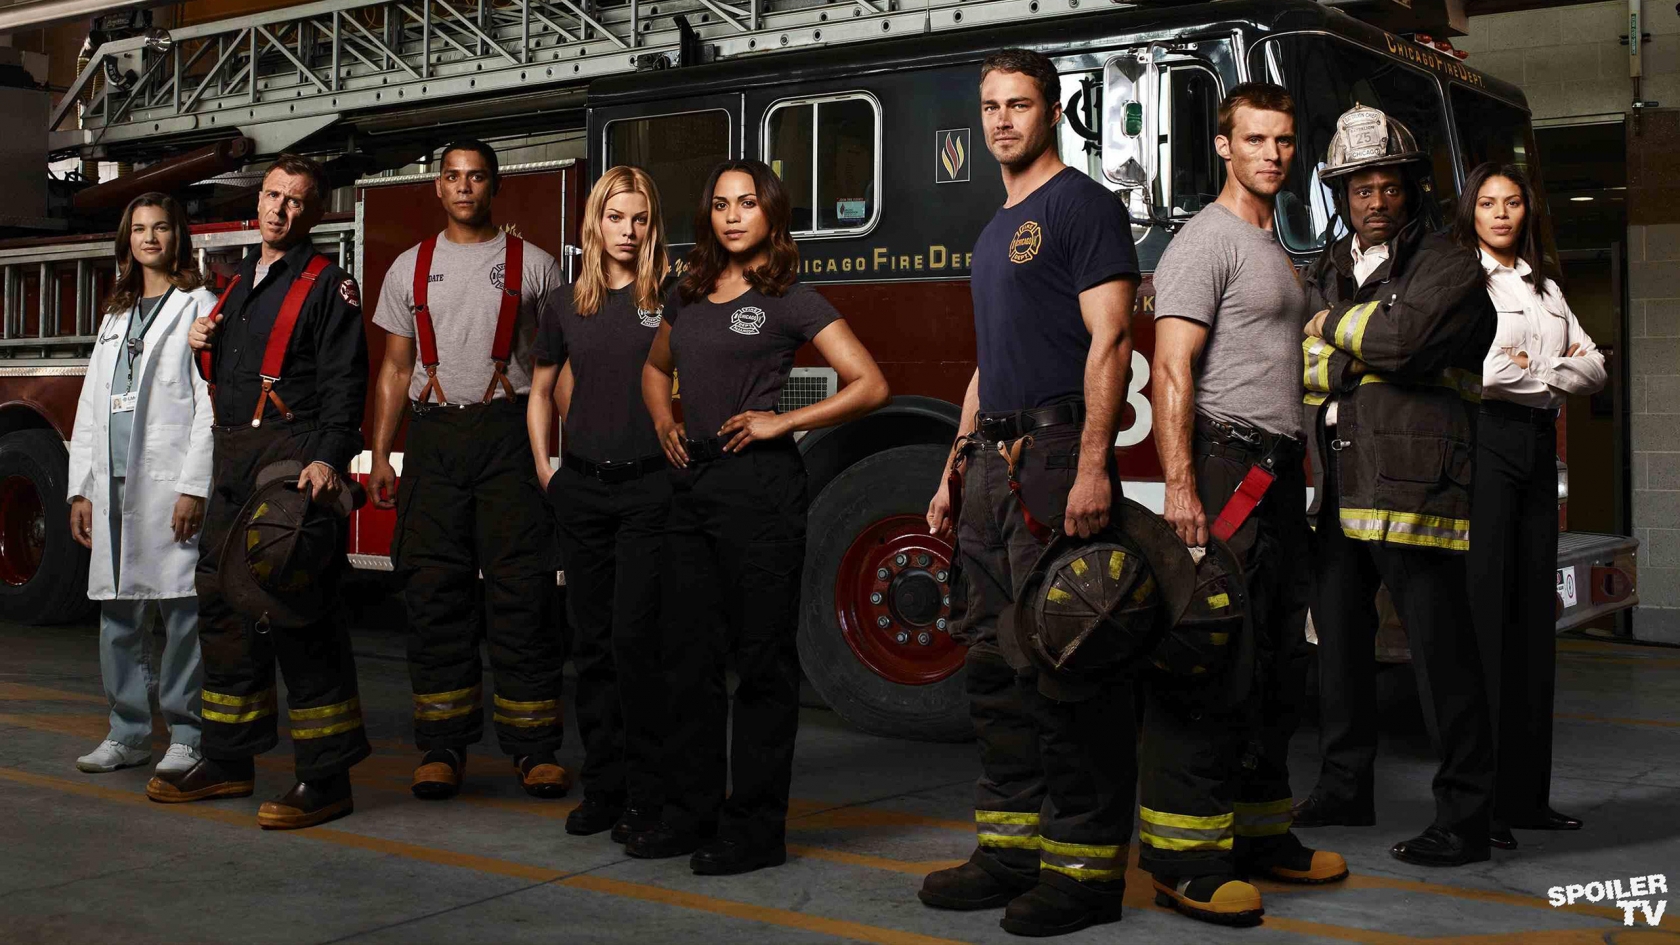 Chicago Fire Tv Show for 1680 x 945 HDTV resolution